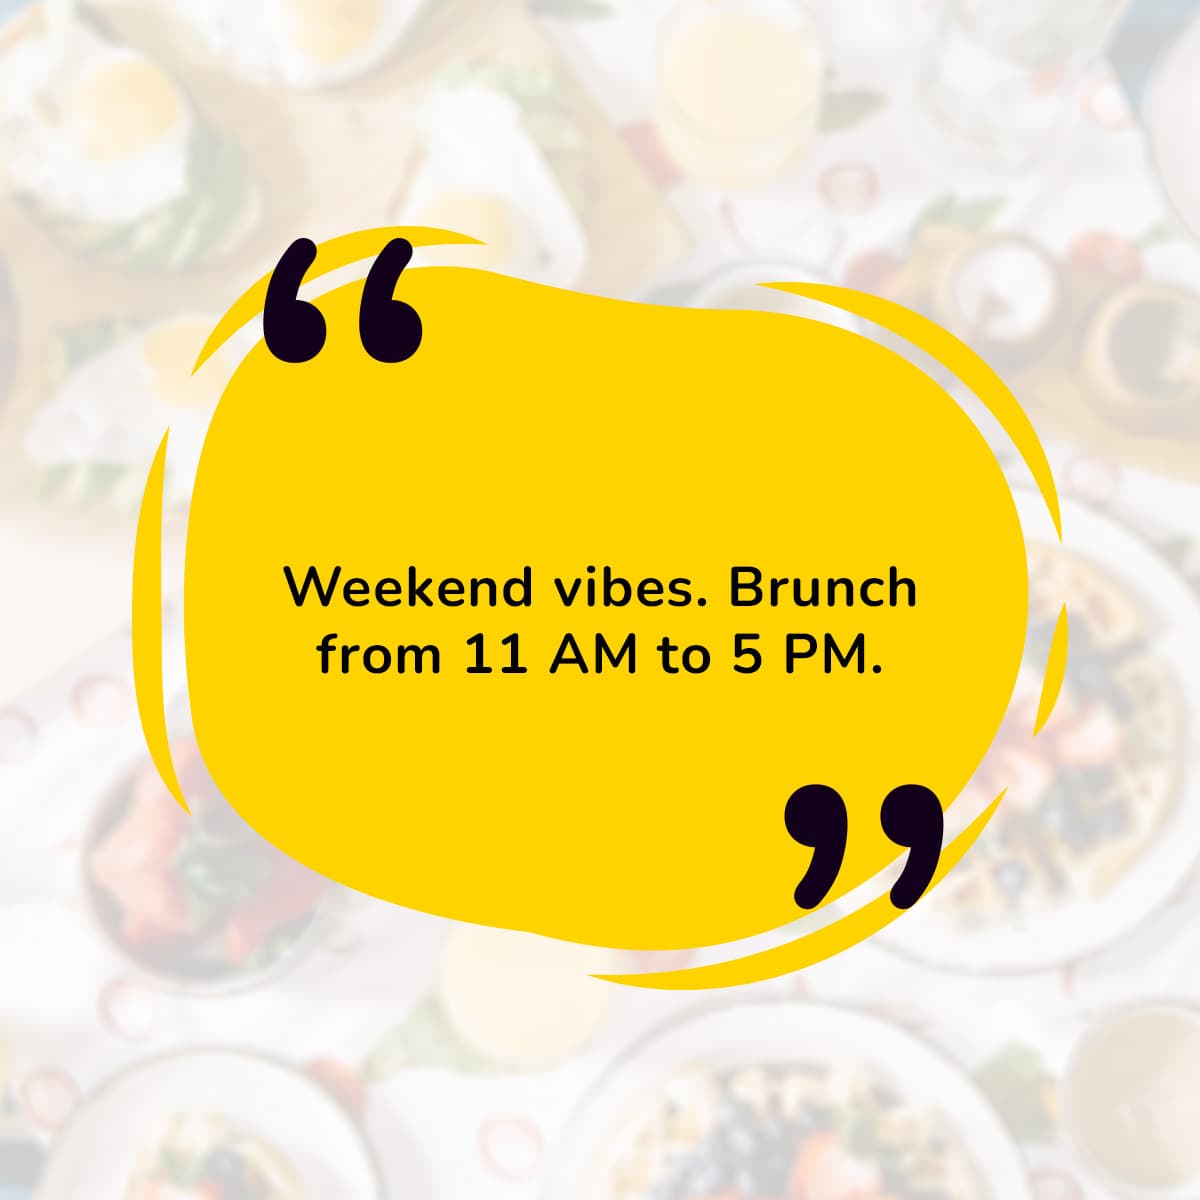 Weekend vibes. Brunch from 11 am to 5 pm.